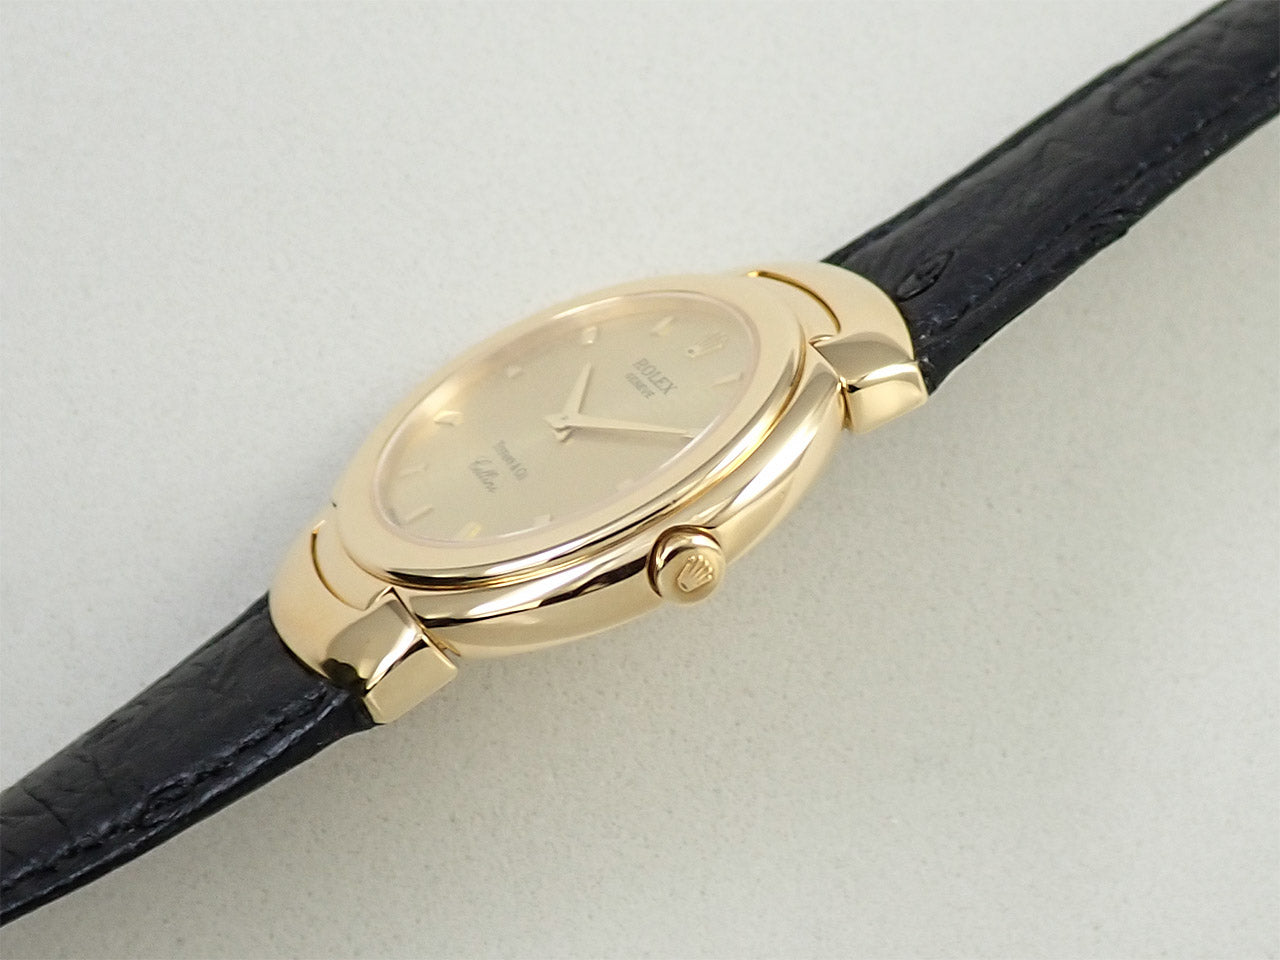 Rolex Cellini Ref.6622 YG Champagne Gold x Computer Dial